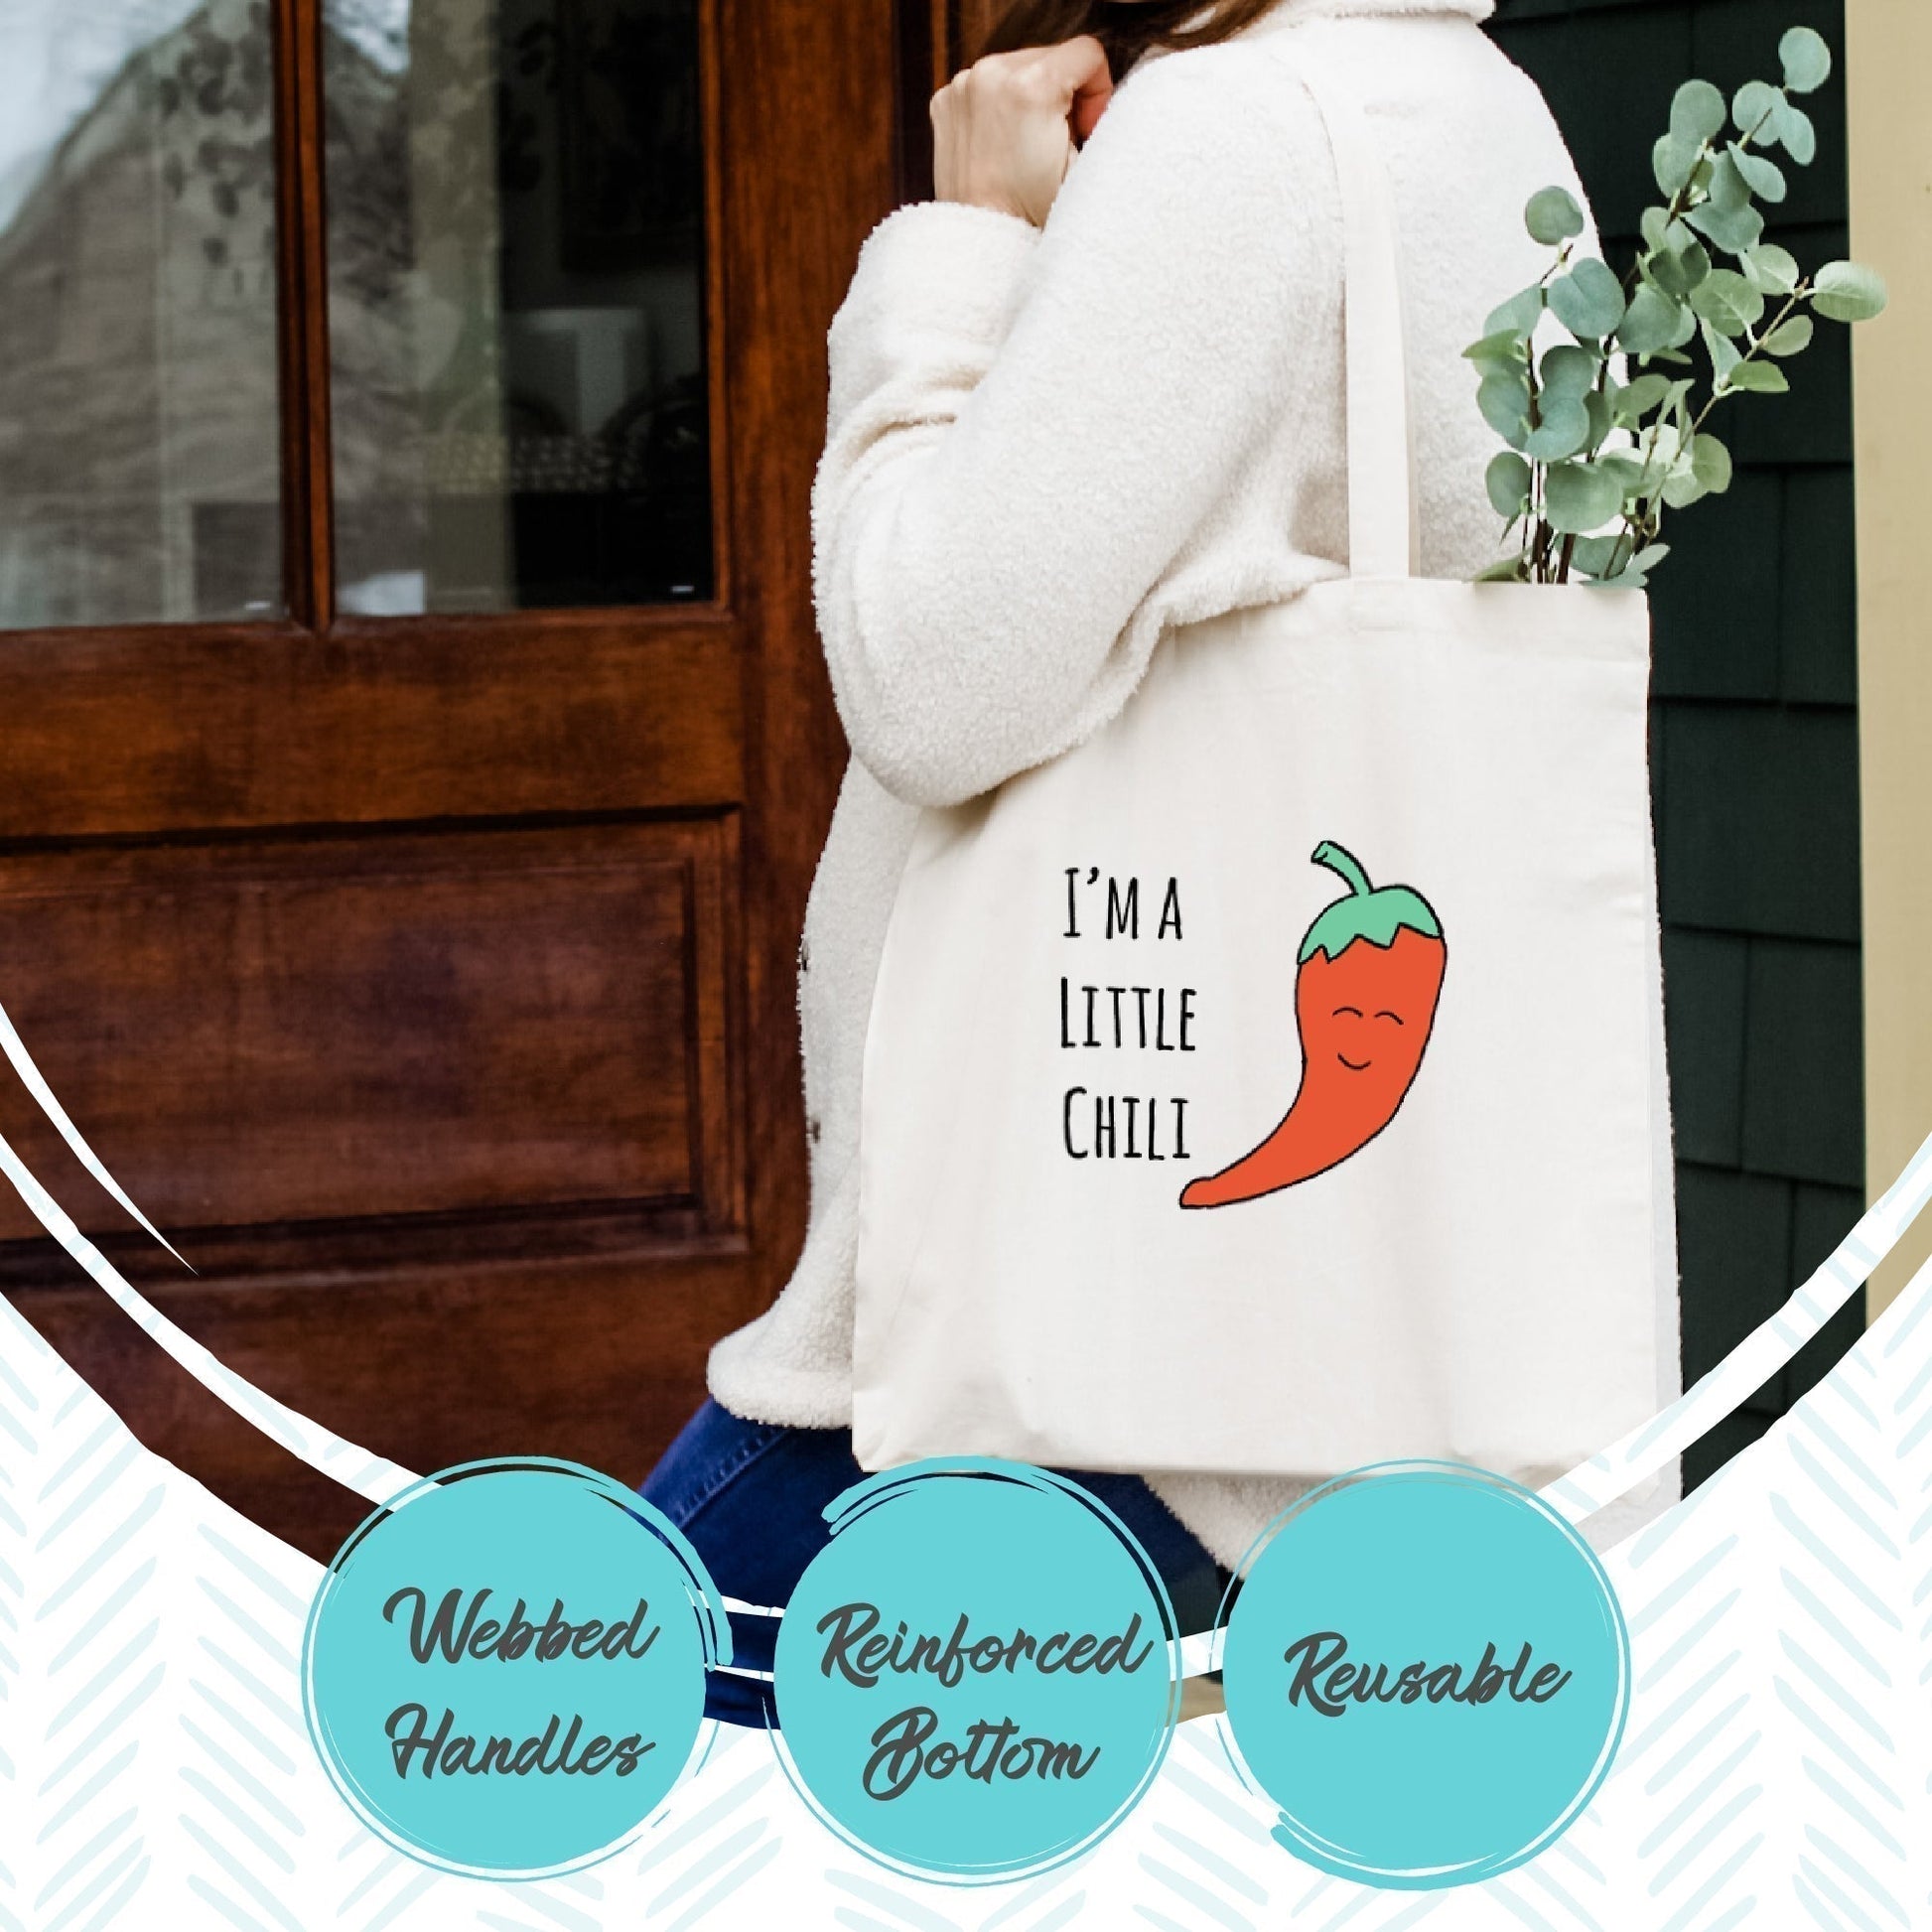 Dishes Don't Be Sad (No One Is Doing Me Either) - Full Color Tote - MoonlightMakers